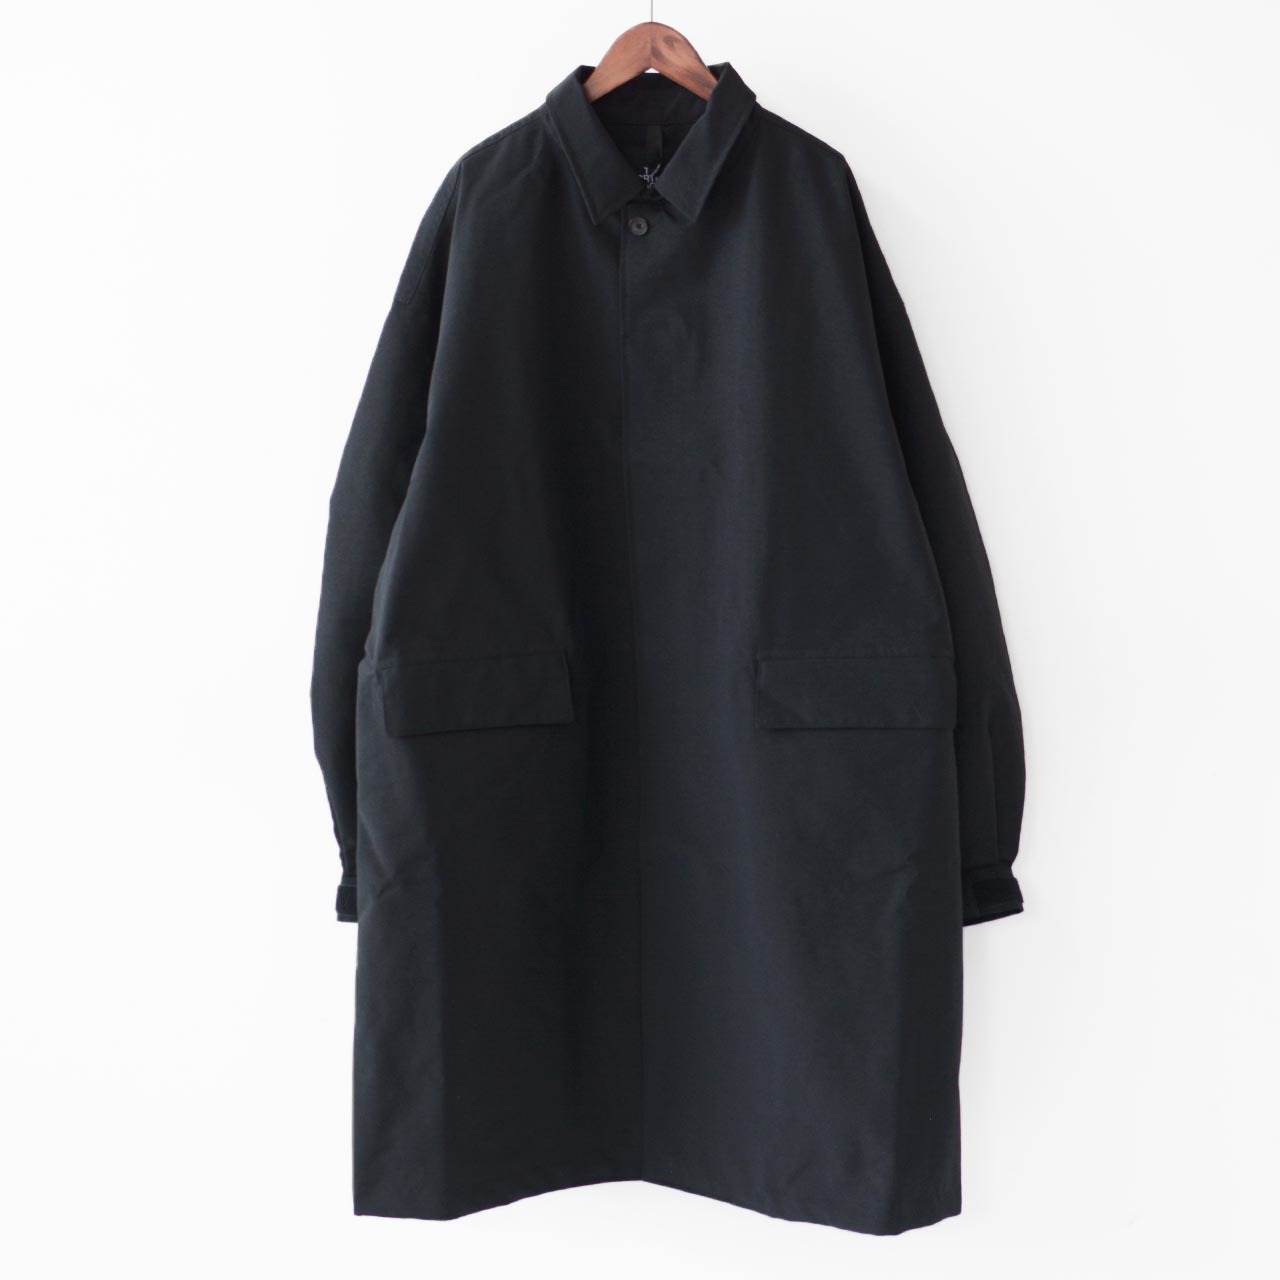 THE NORTH FACE [ザ・ノース・フェイス]  Compilation Over Coat [NP62361]_f0051306_13460003.jpg